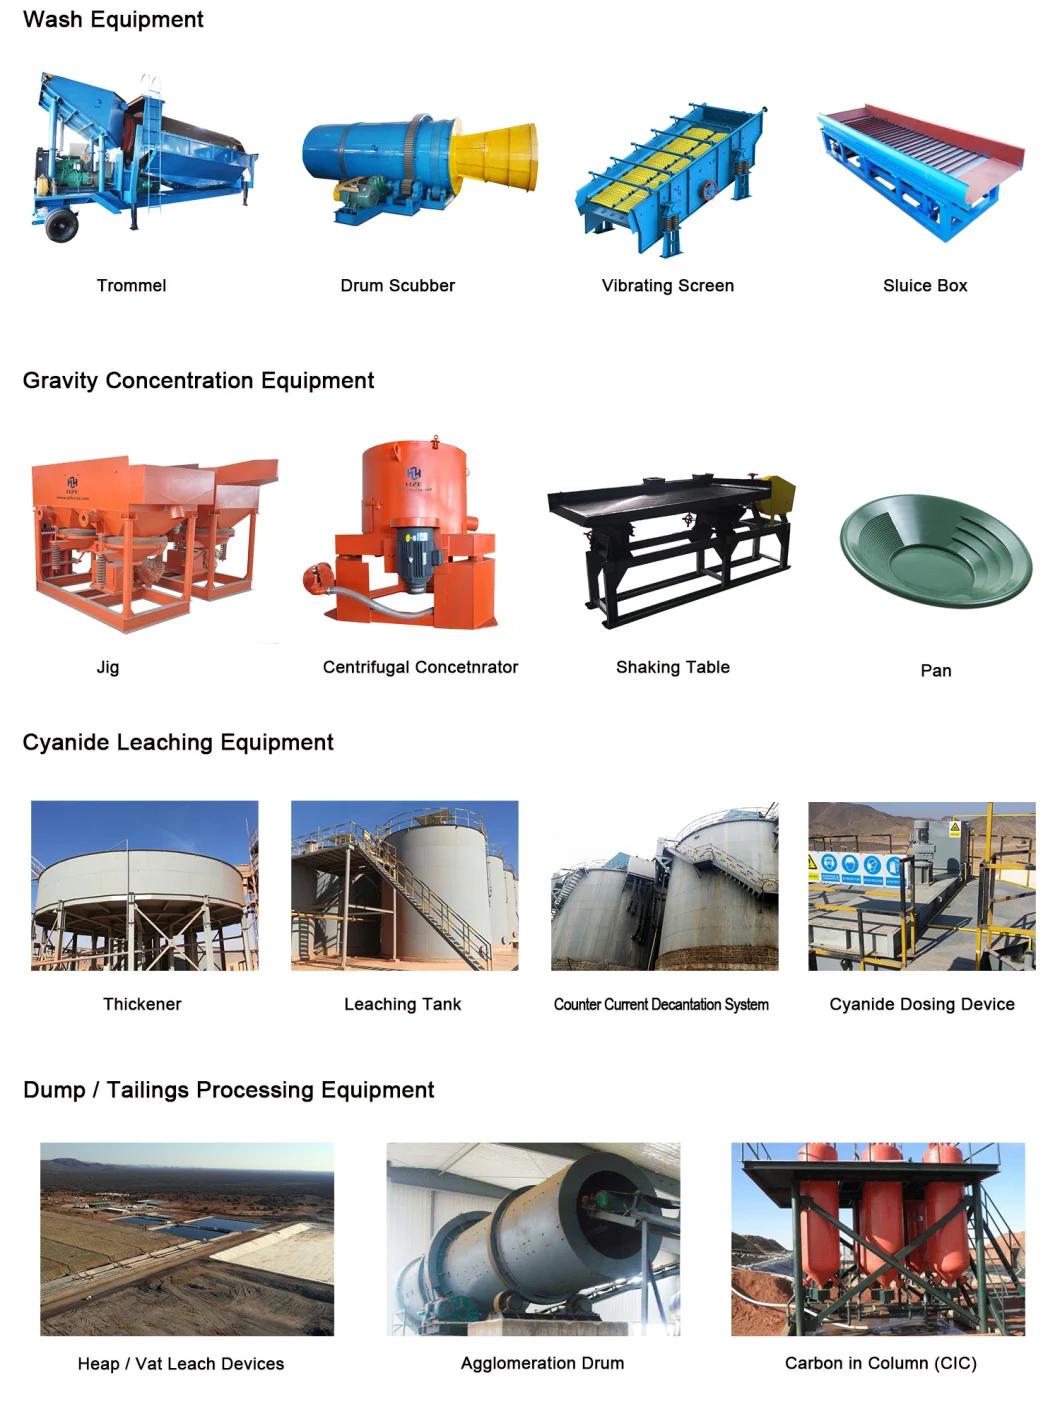 Alluvial / Placer / Hard Rock Mining Gold Processing Equipment